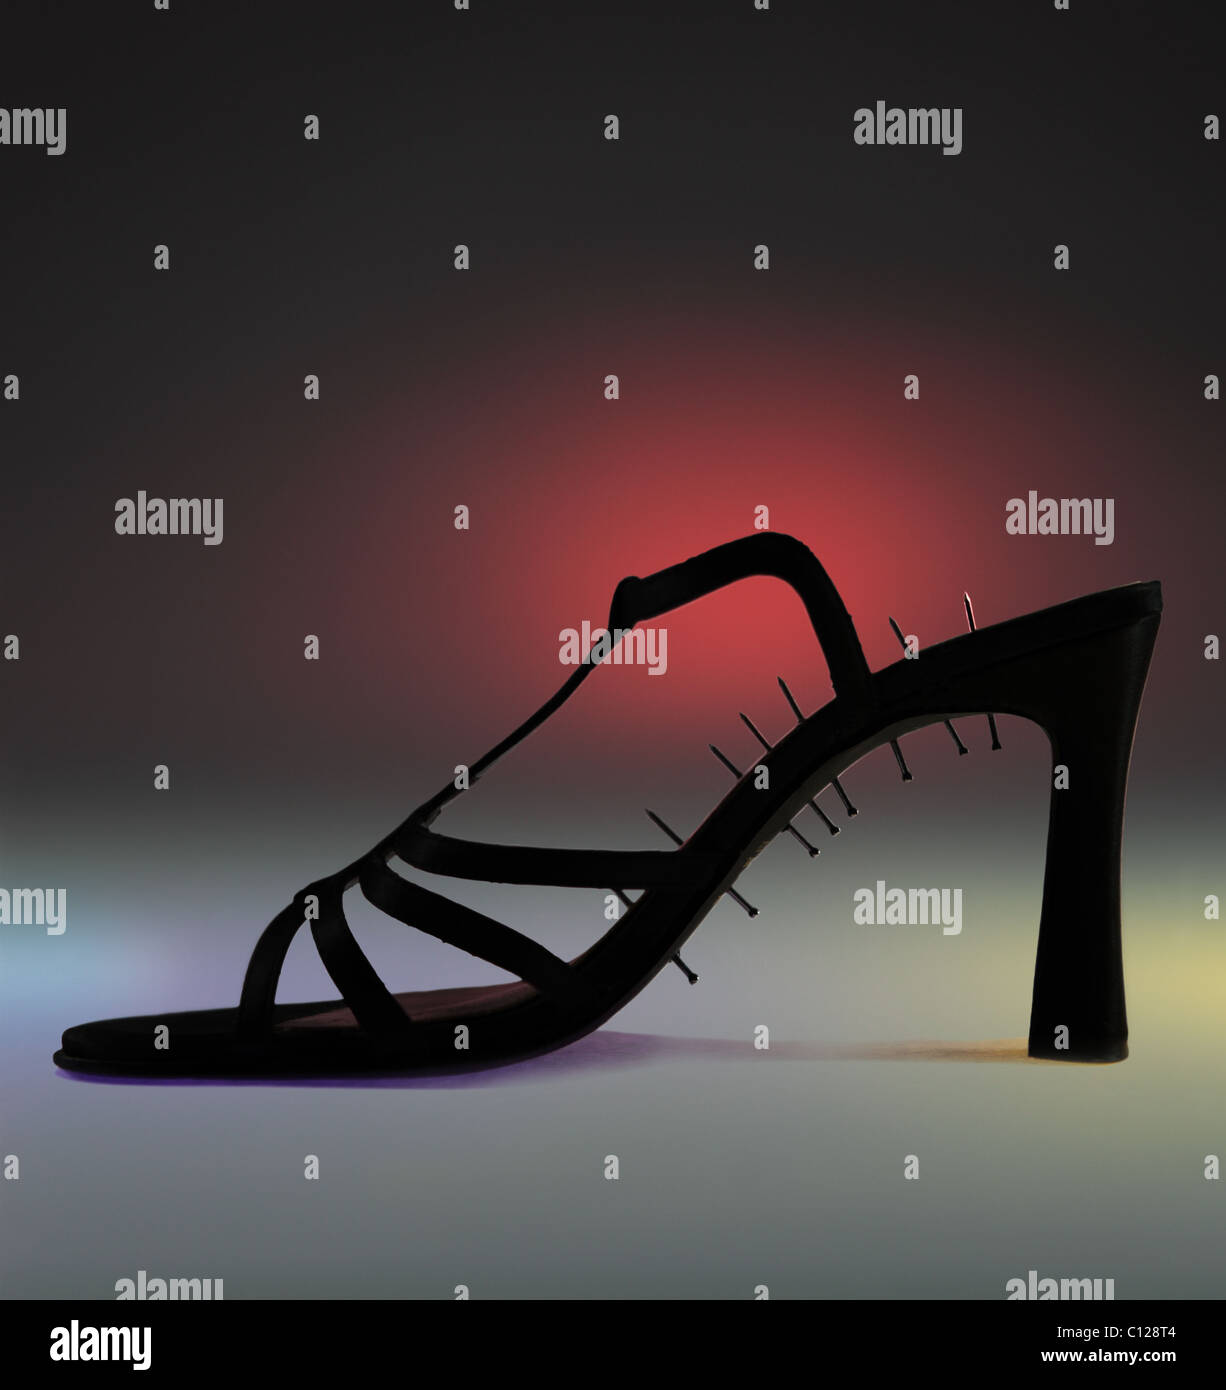 black high heel shoe. The sole is pierced by nails. This image symbolizes feet sore and high heeled shoes discomfort Stock Photo